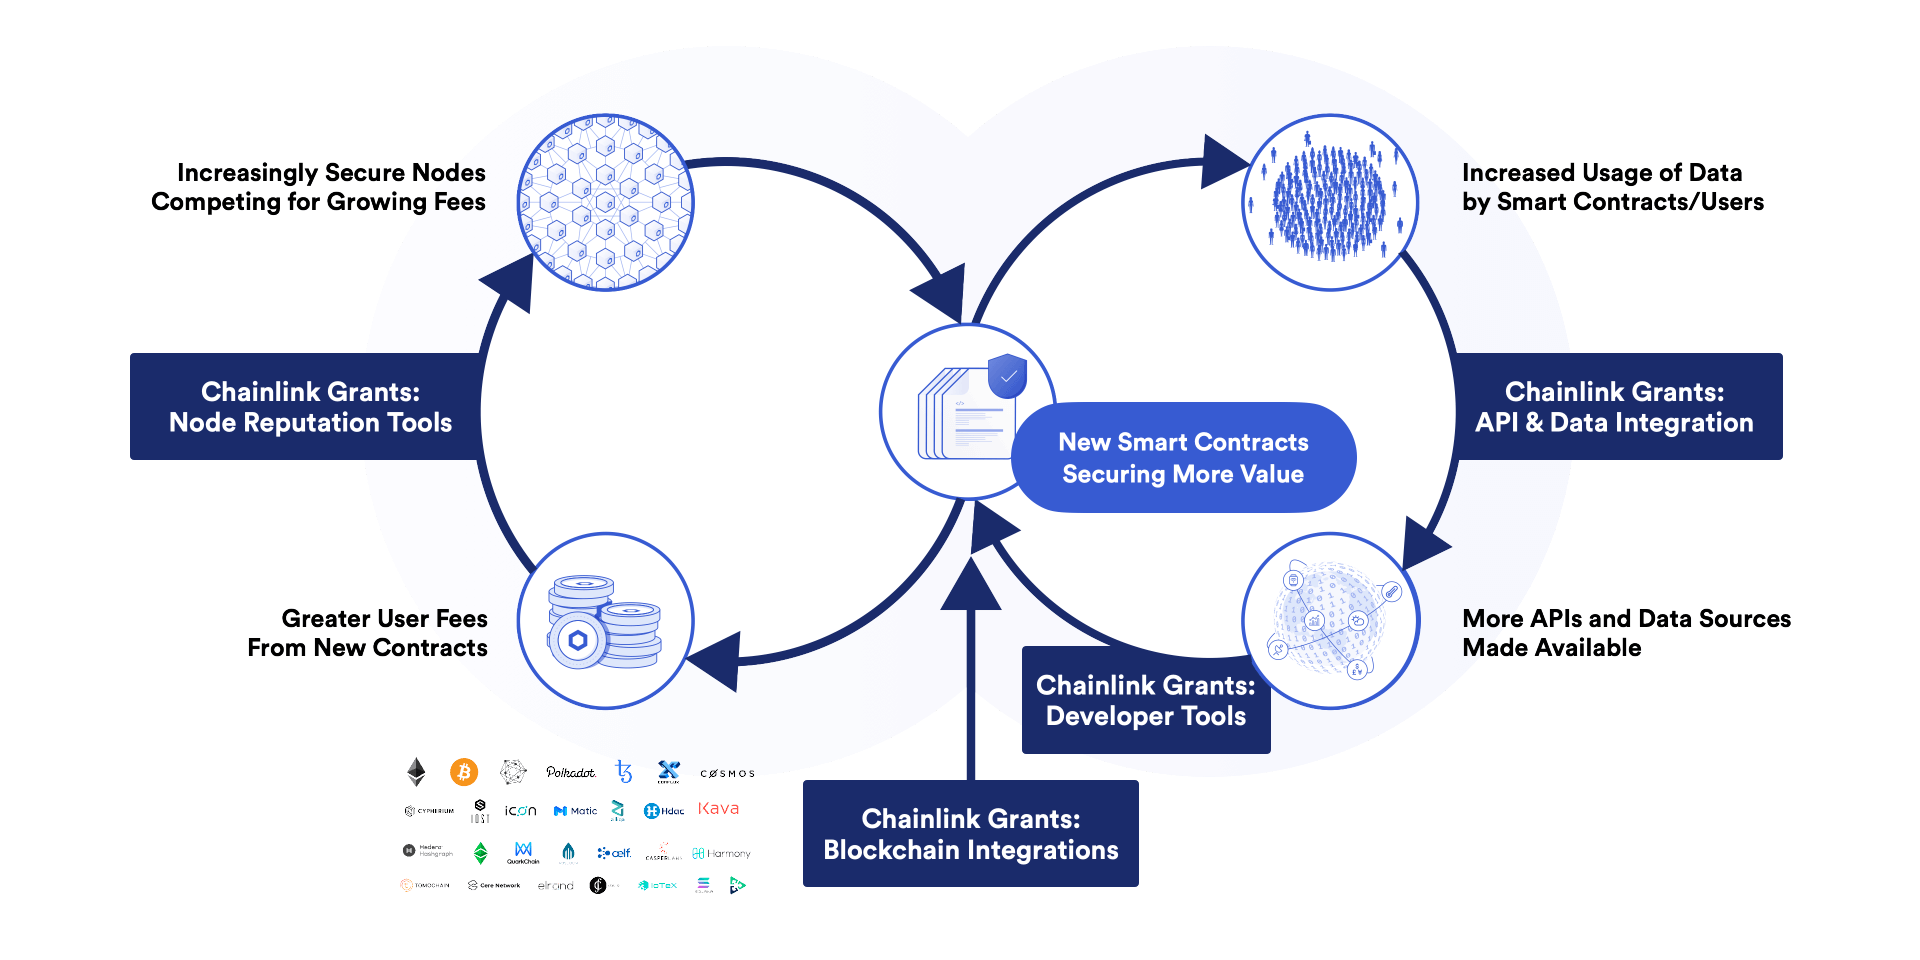 A diagram showing a positive feedback loop between data and security to enhance the Chainlink Network.